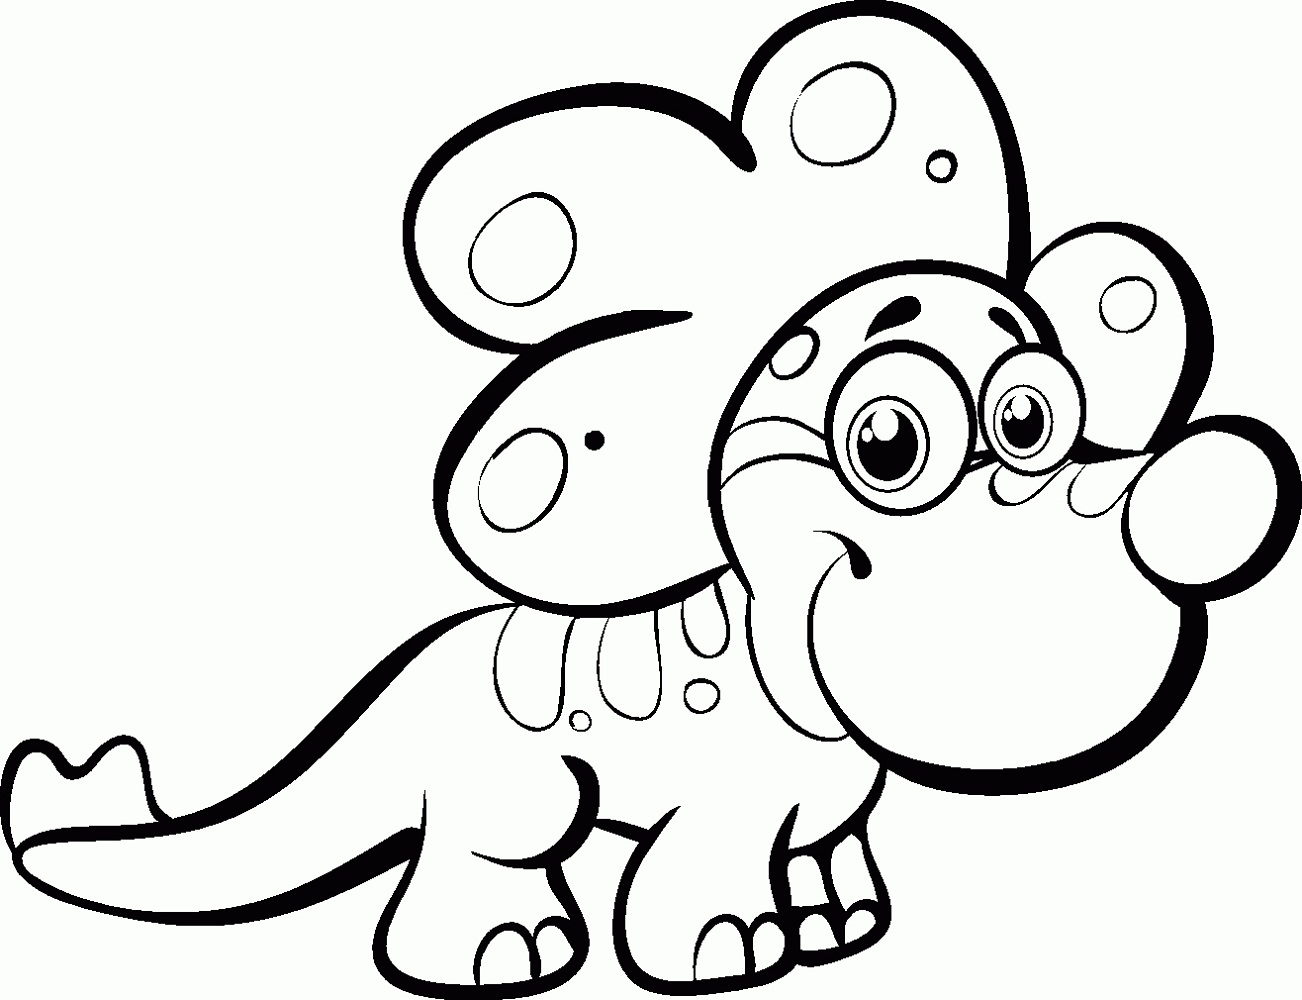 Baby Dinosaur Coloring Pages for Preschoolers | Activity ...